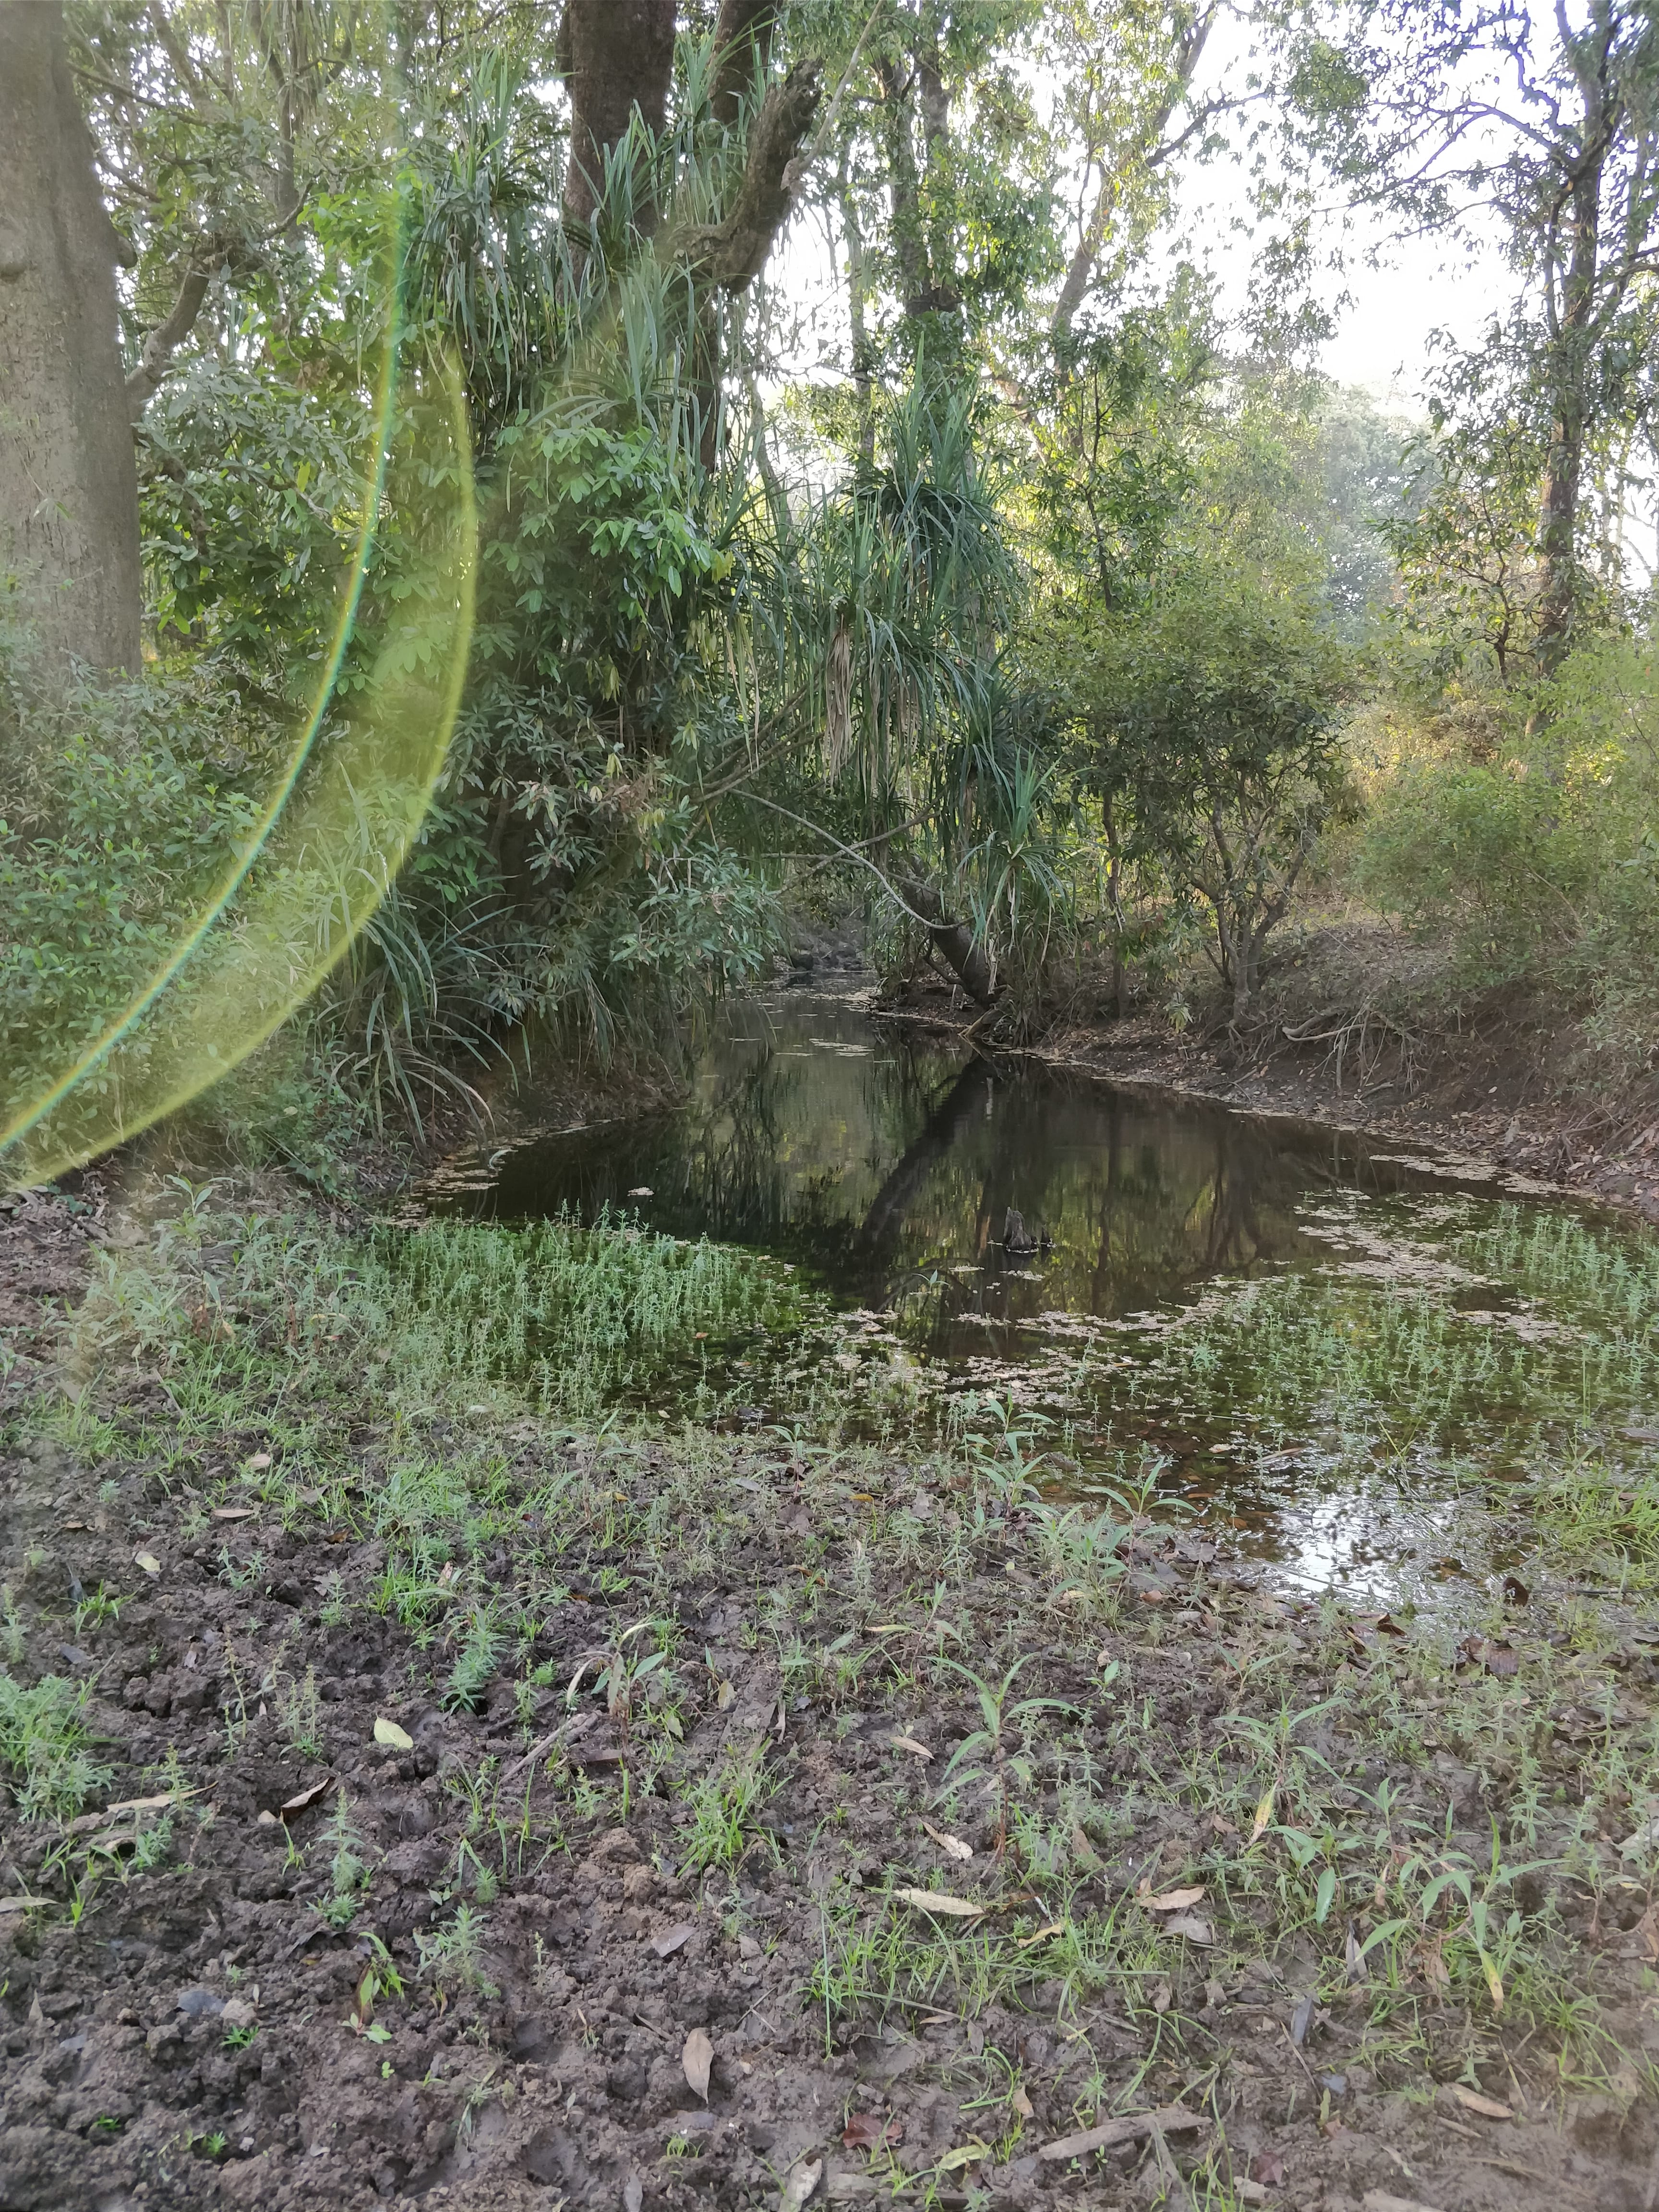 another small pond inside the forest